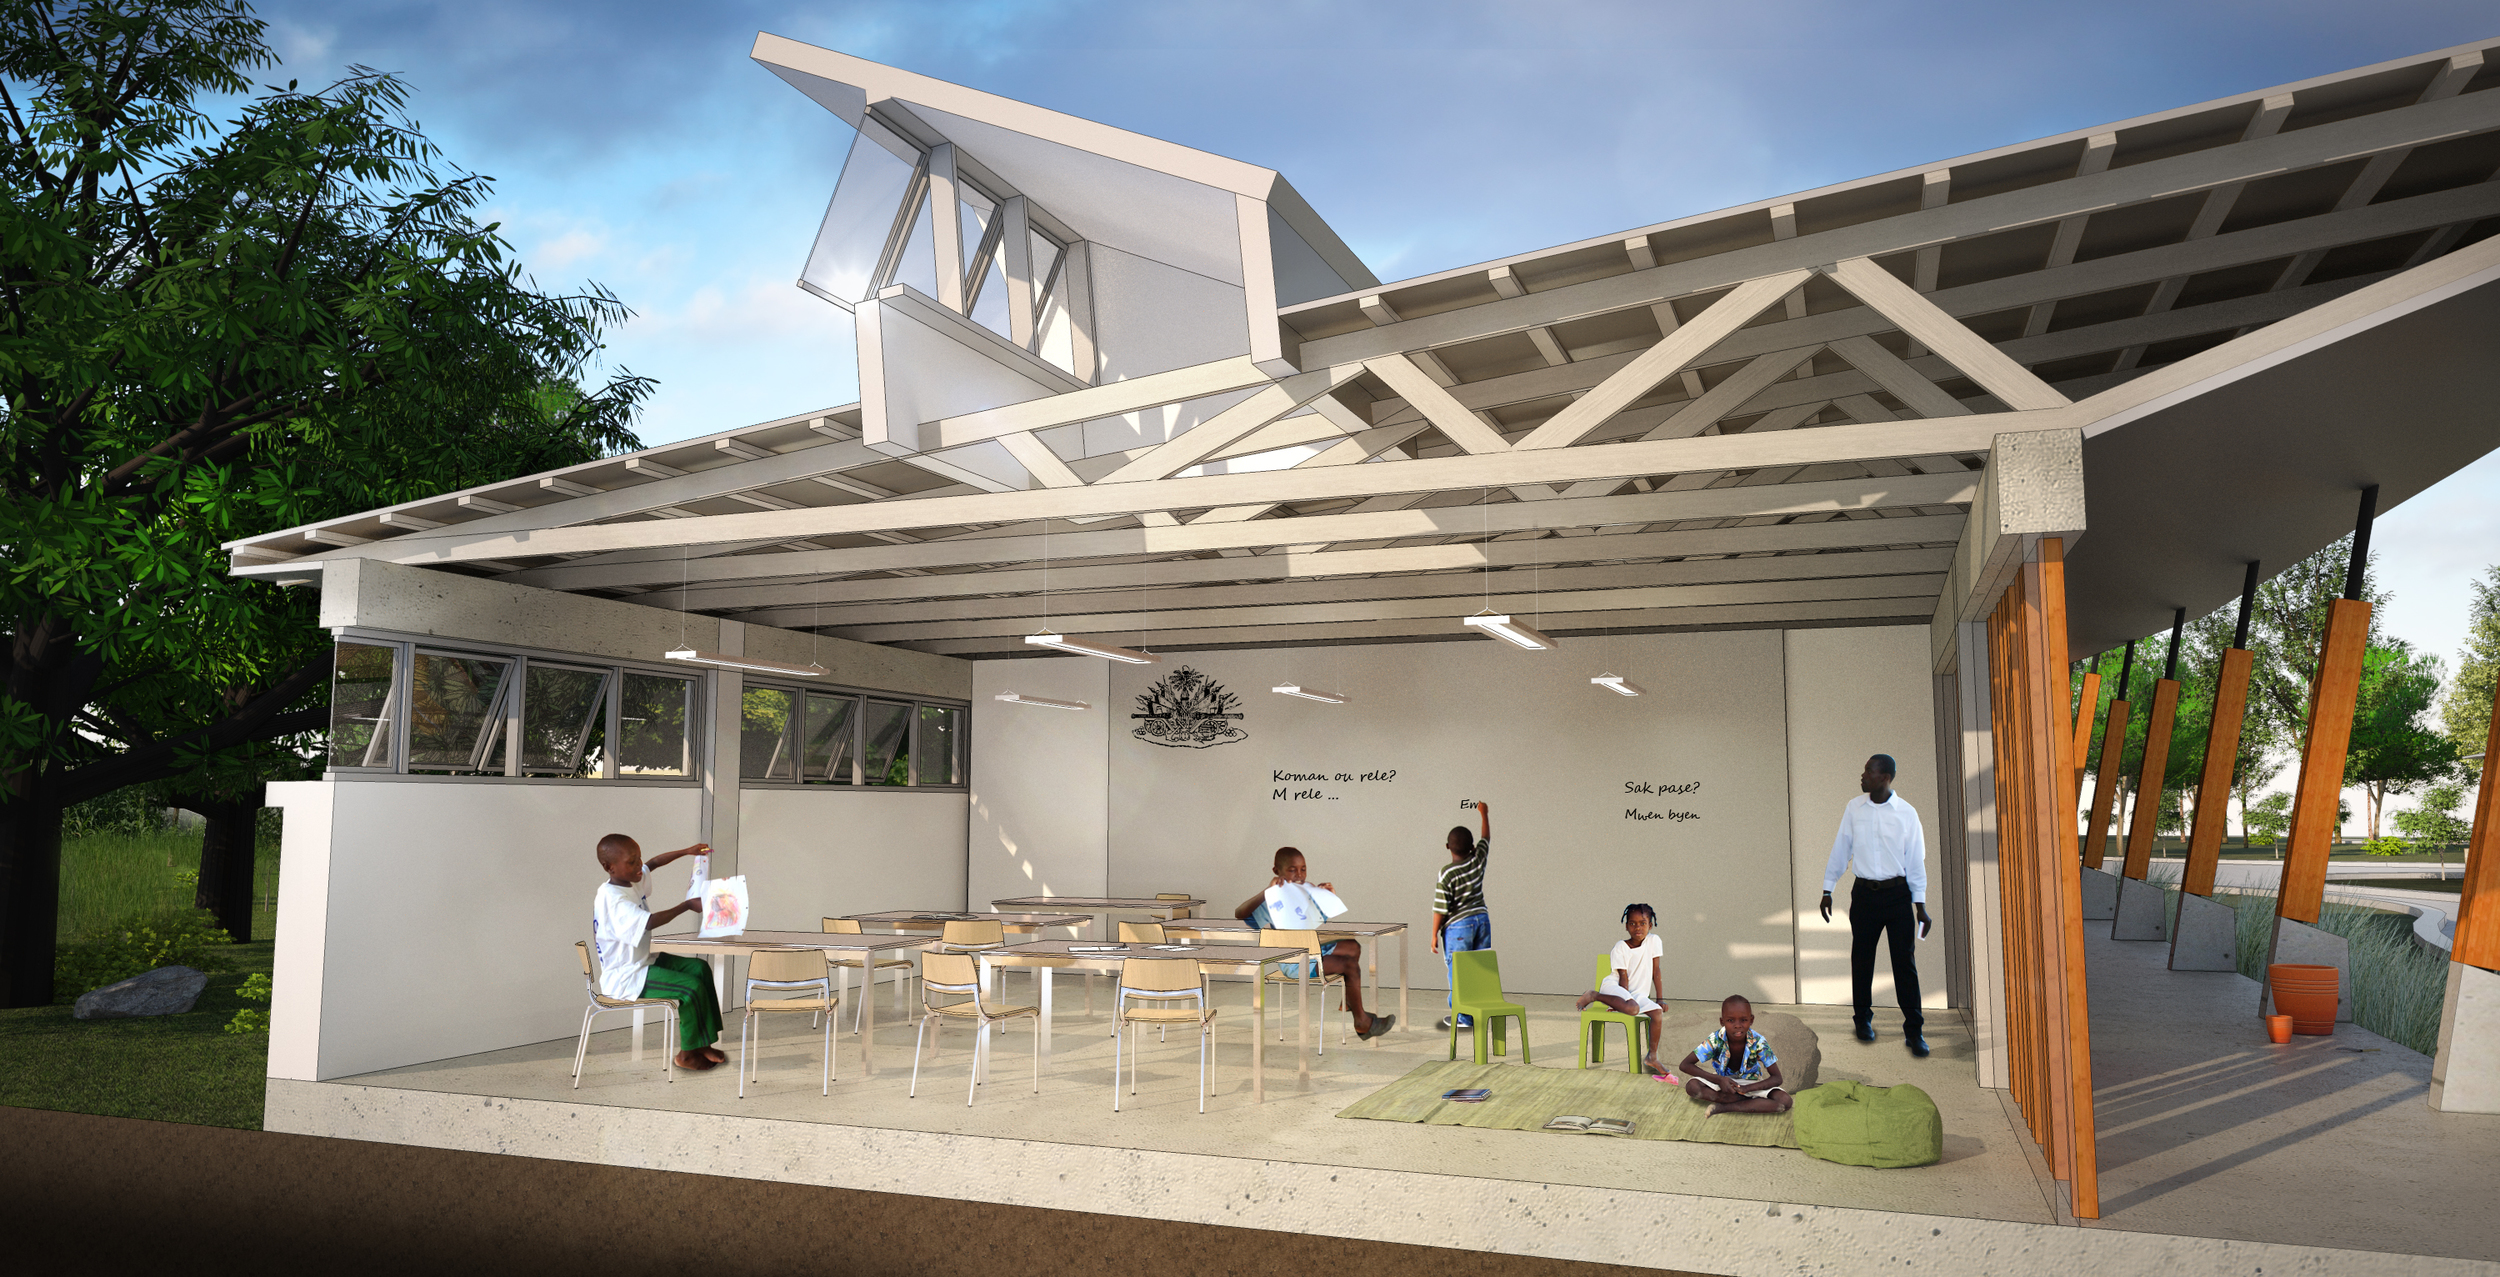 Rooftop monitors above each classroom provide daylight and facilitate natural ventilation